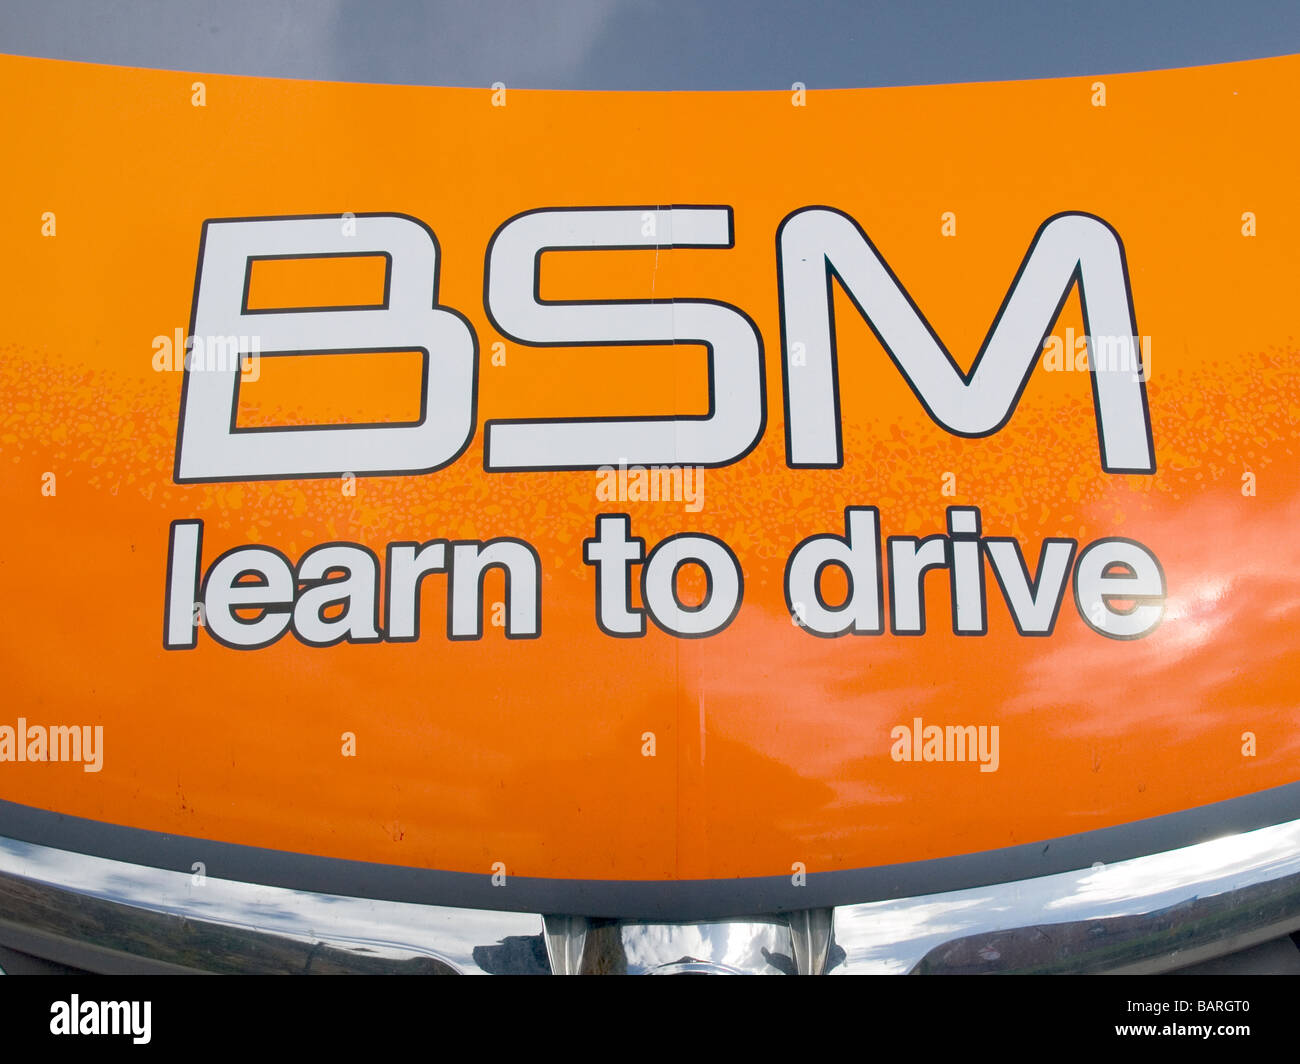 BSM Learn to Drive legend on the bonnet of a British School of Motoring Car Stock Photo